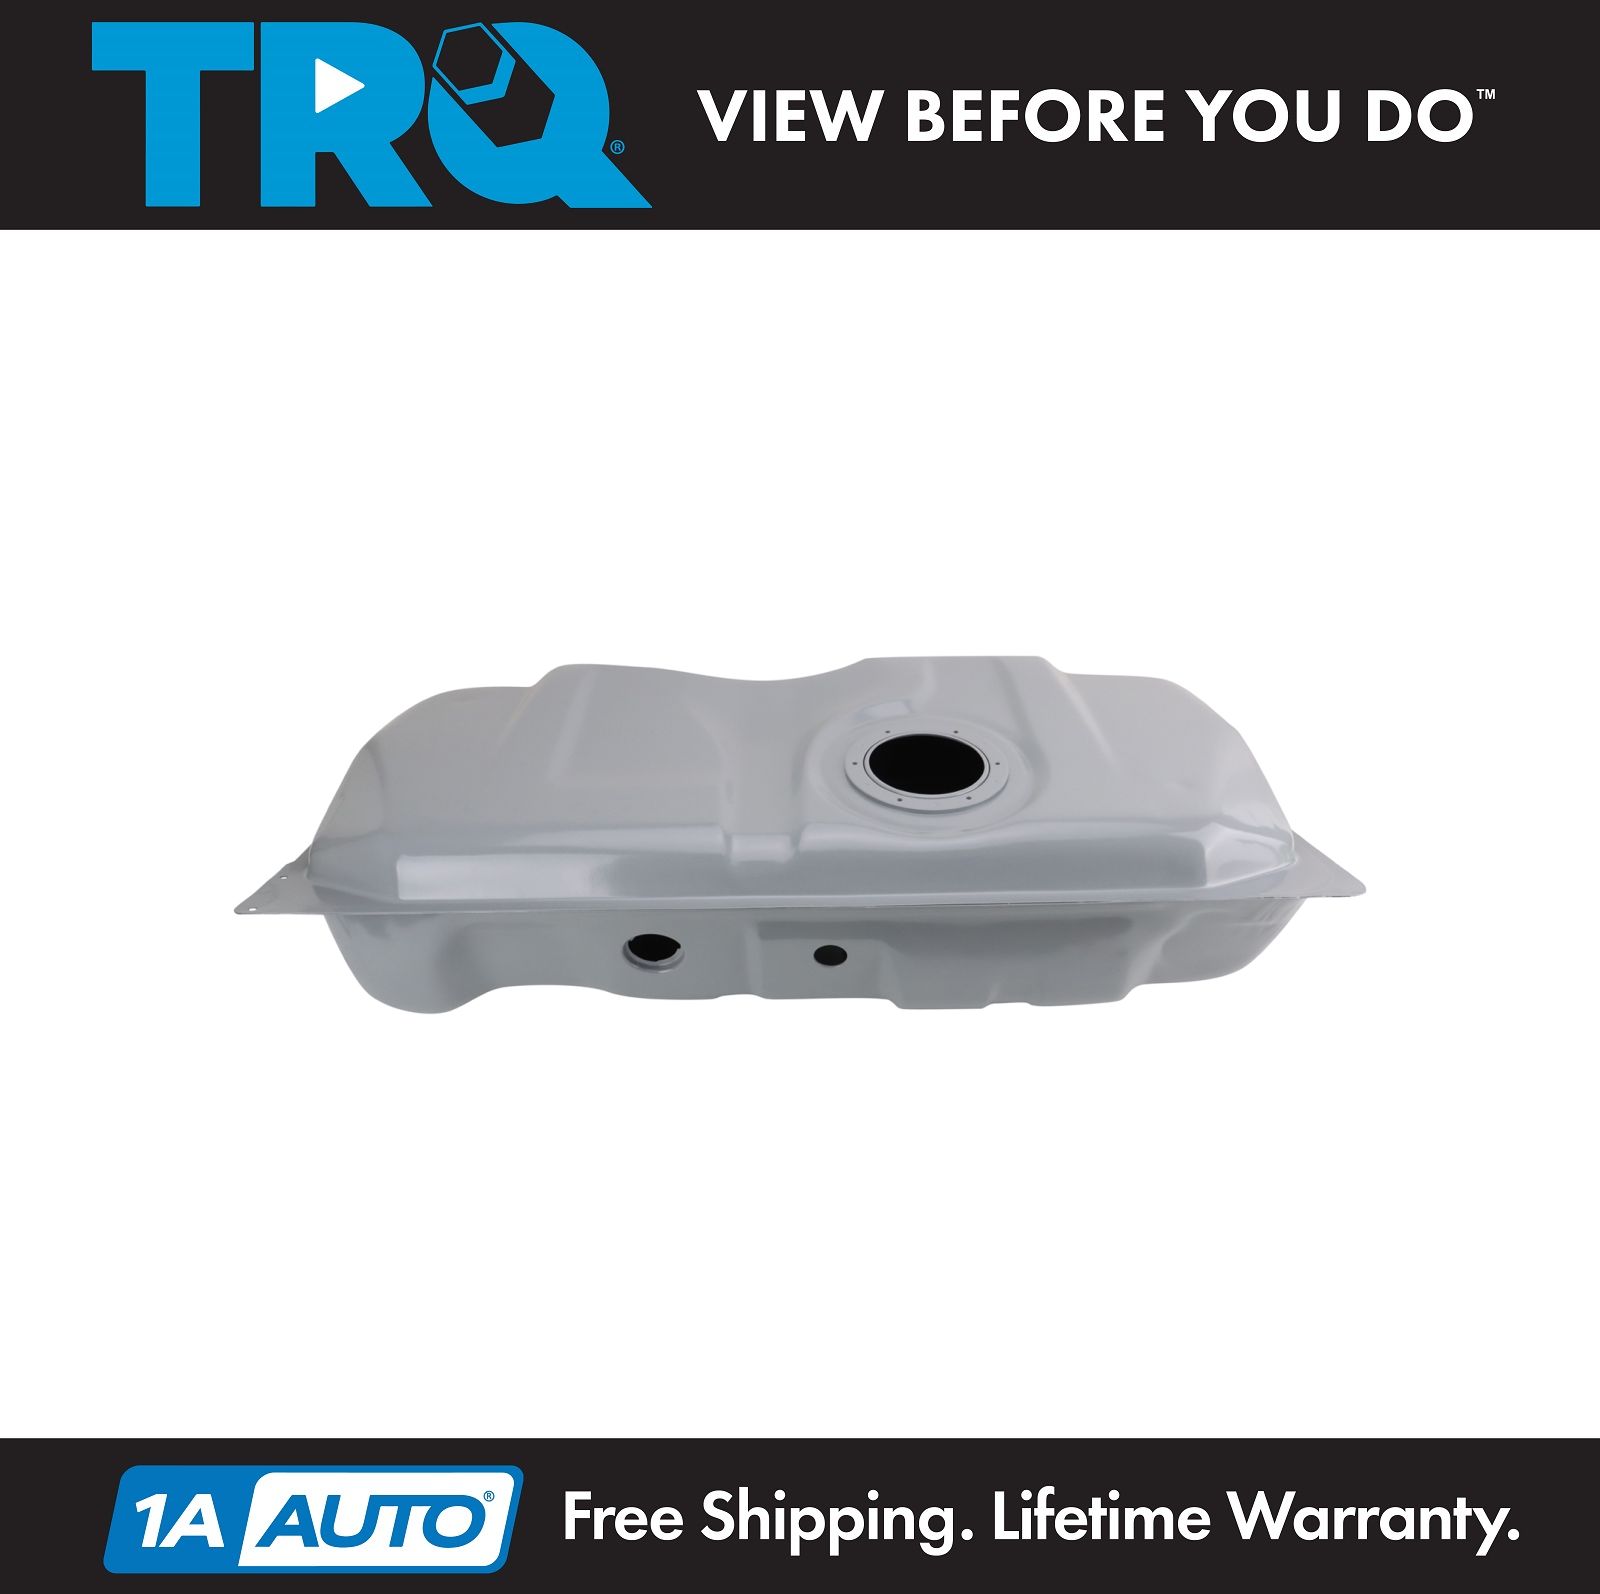 2008 grand marquis gas tank size